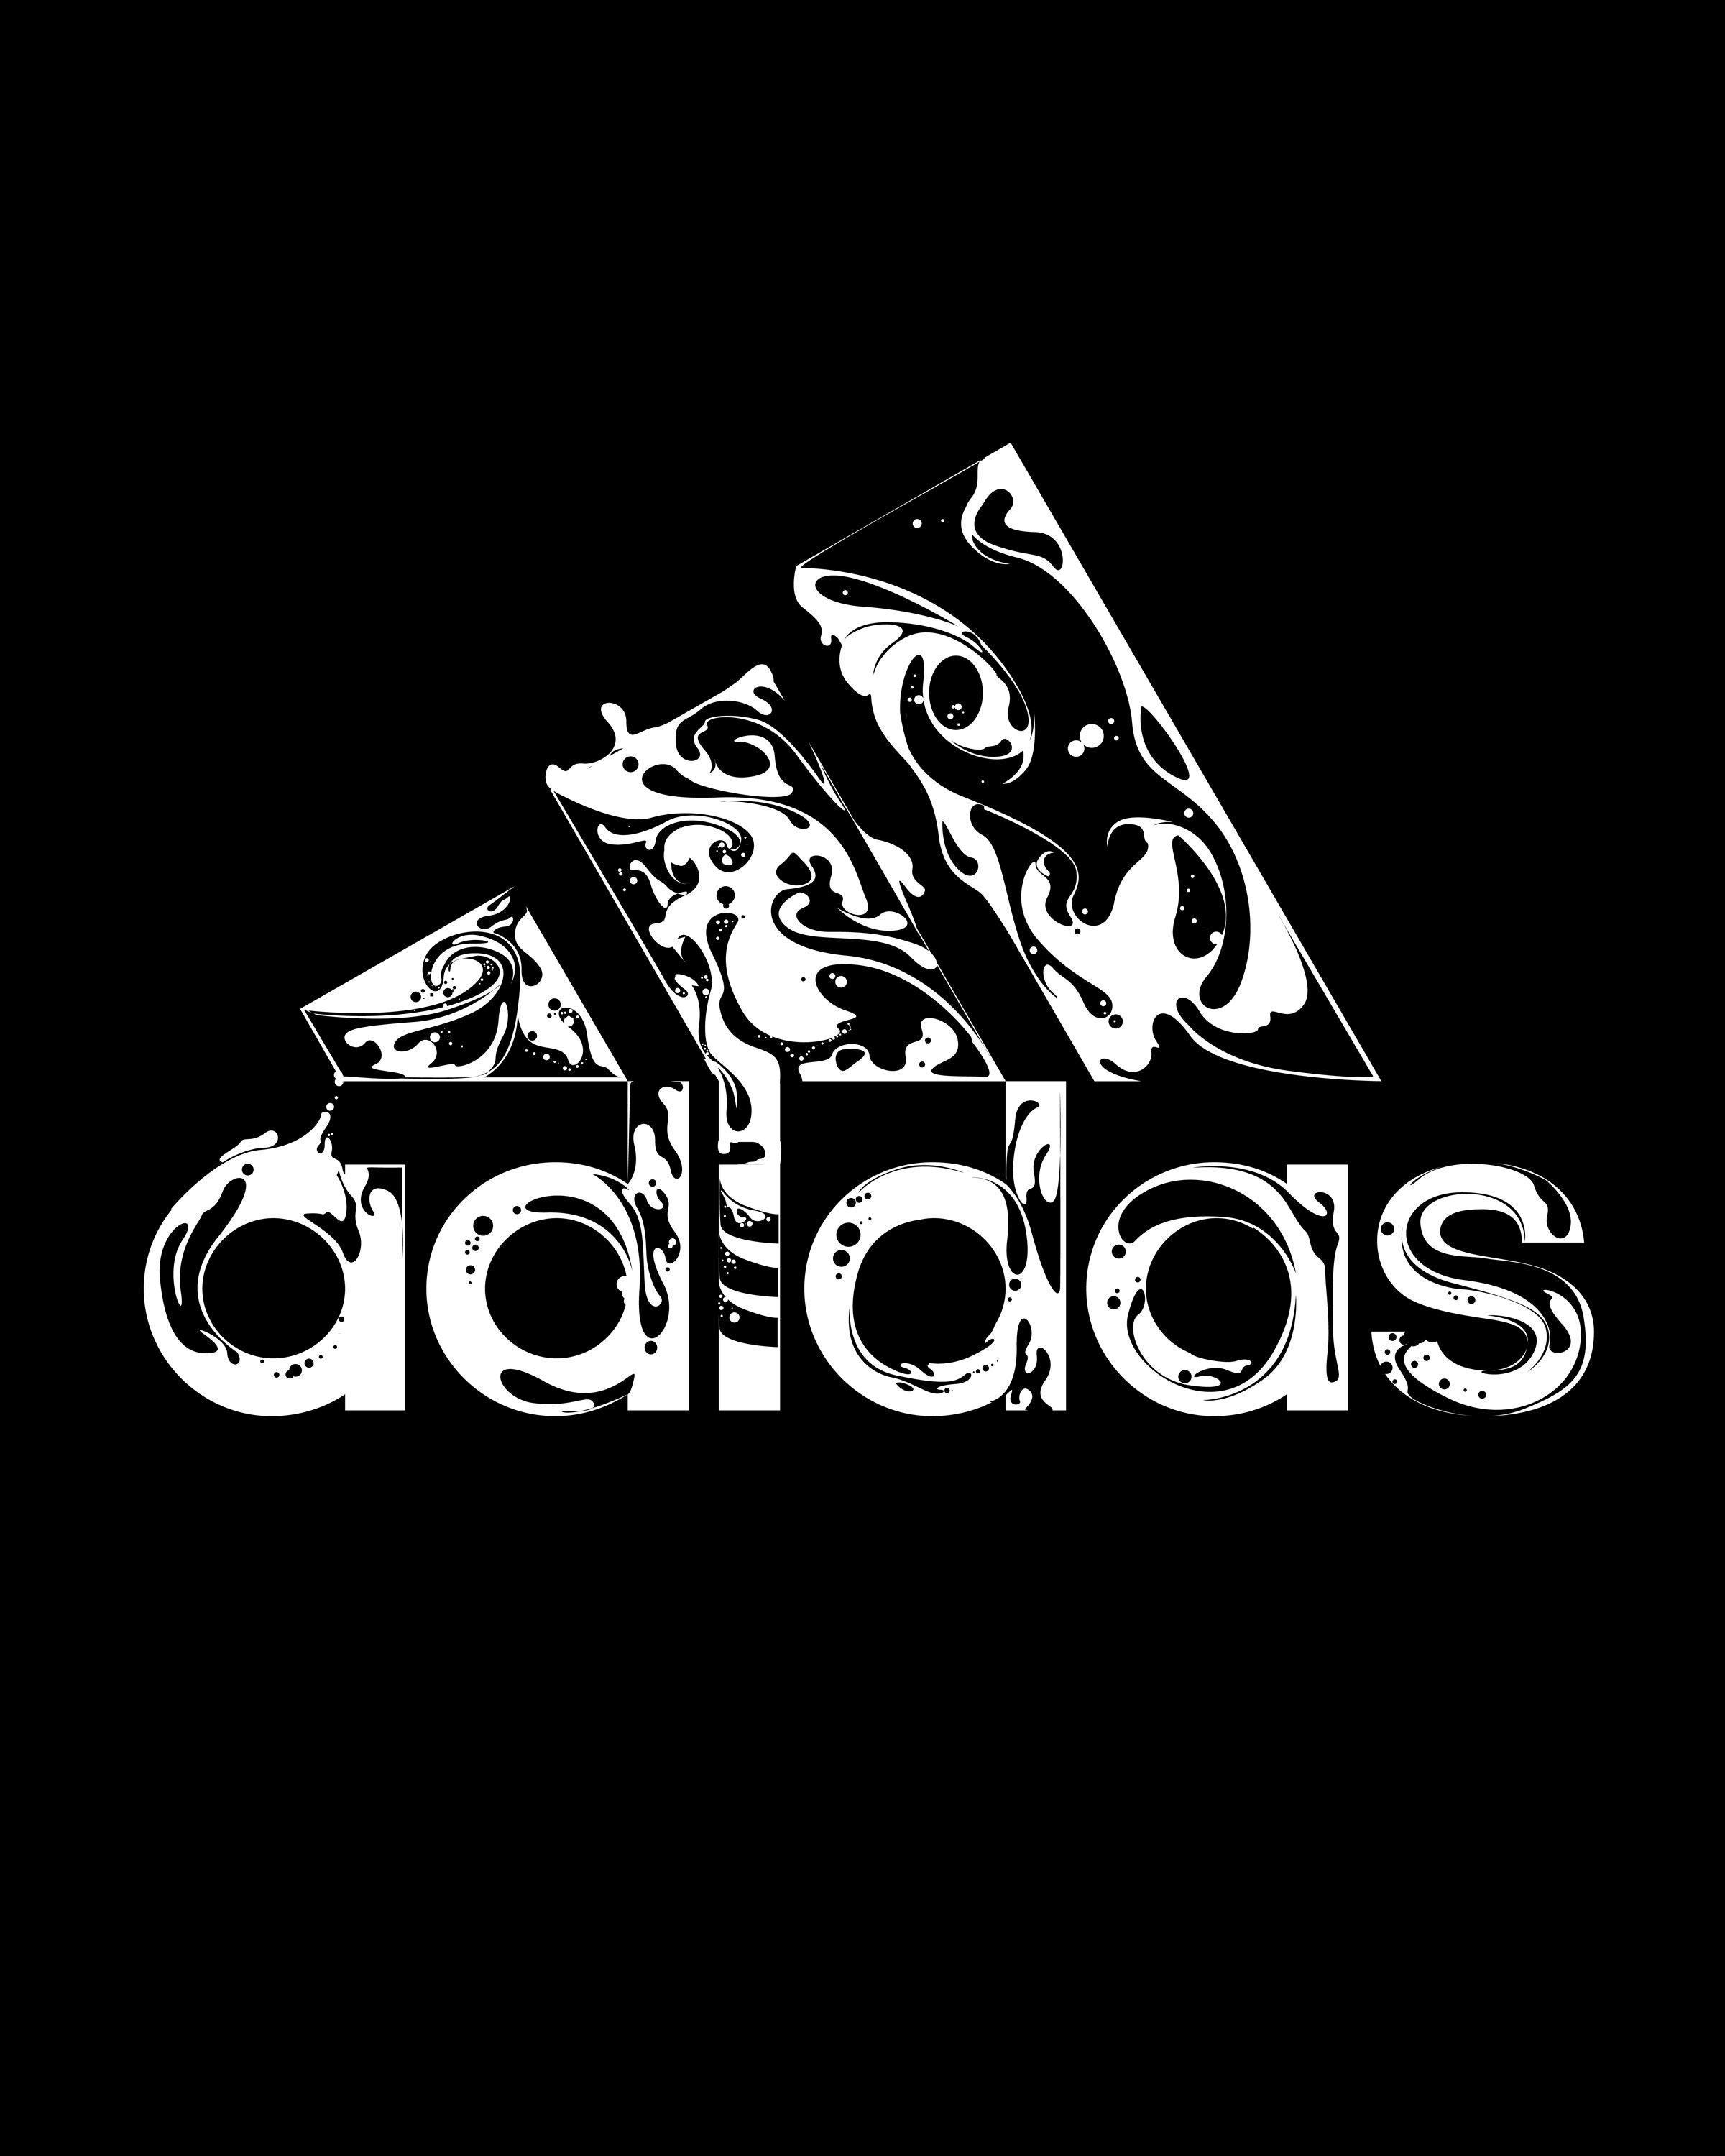 adidas cool pictures